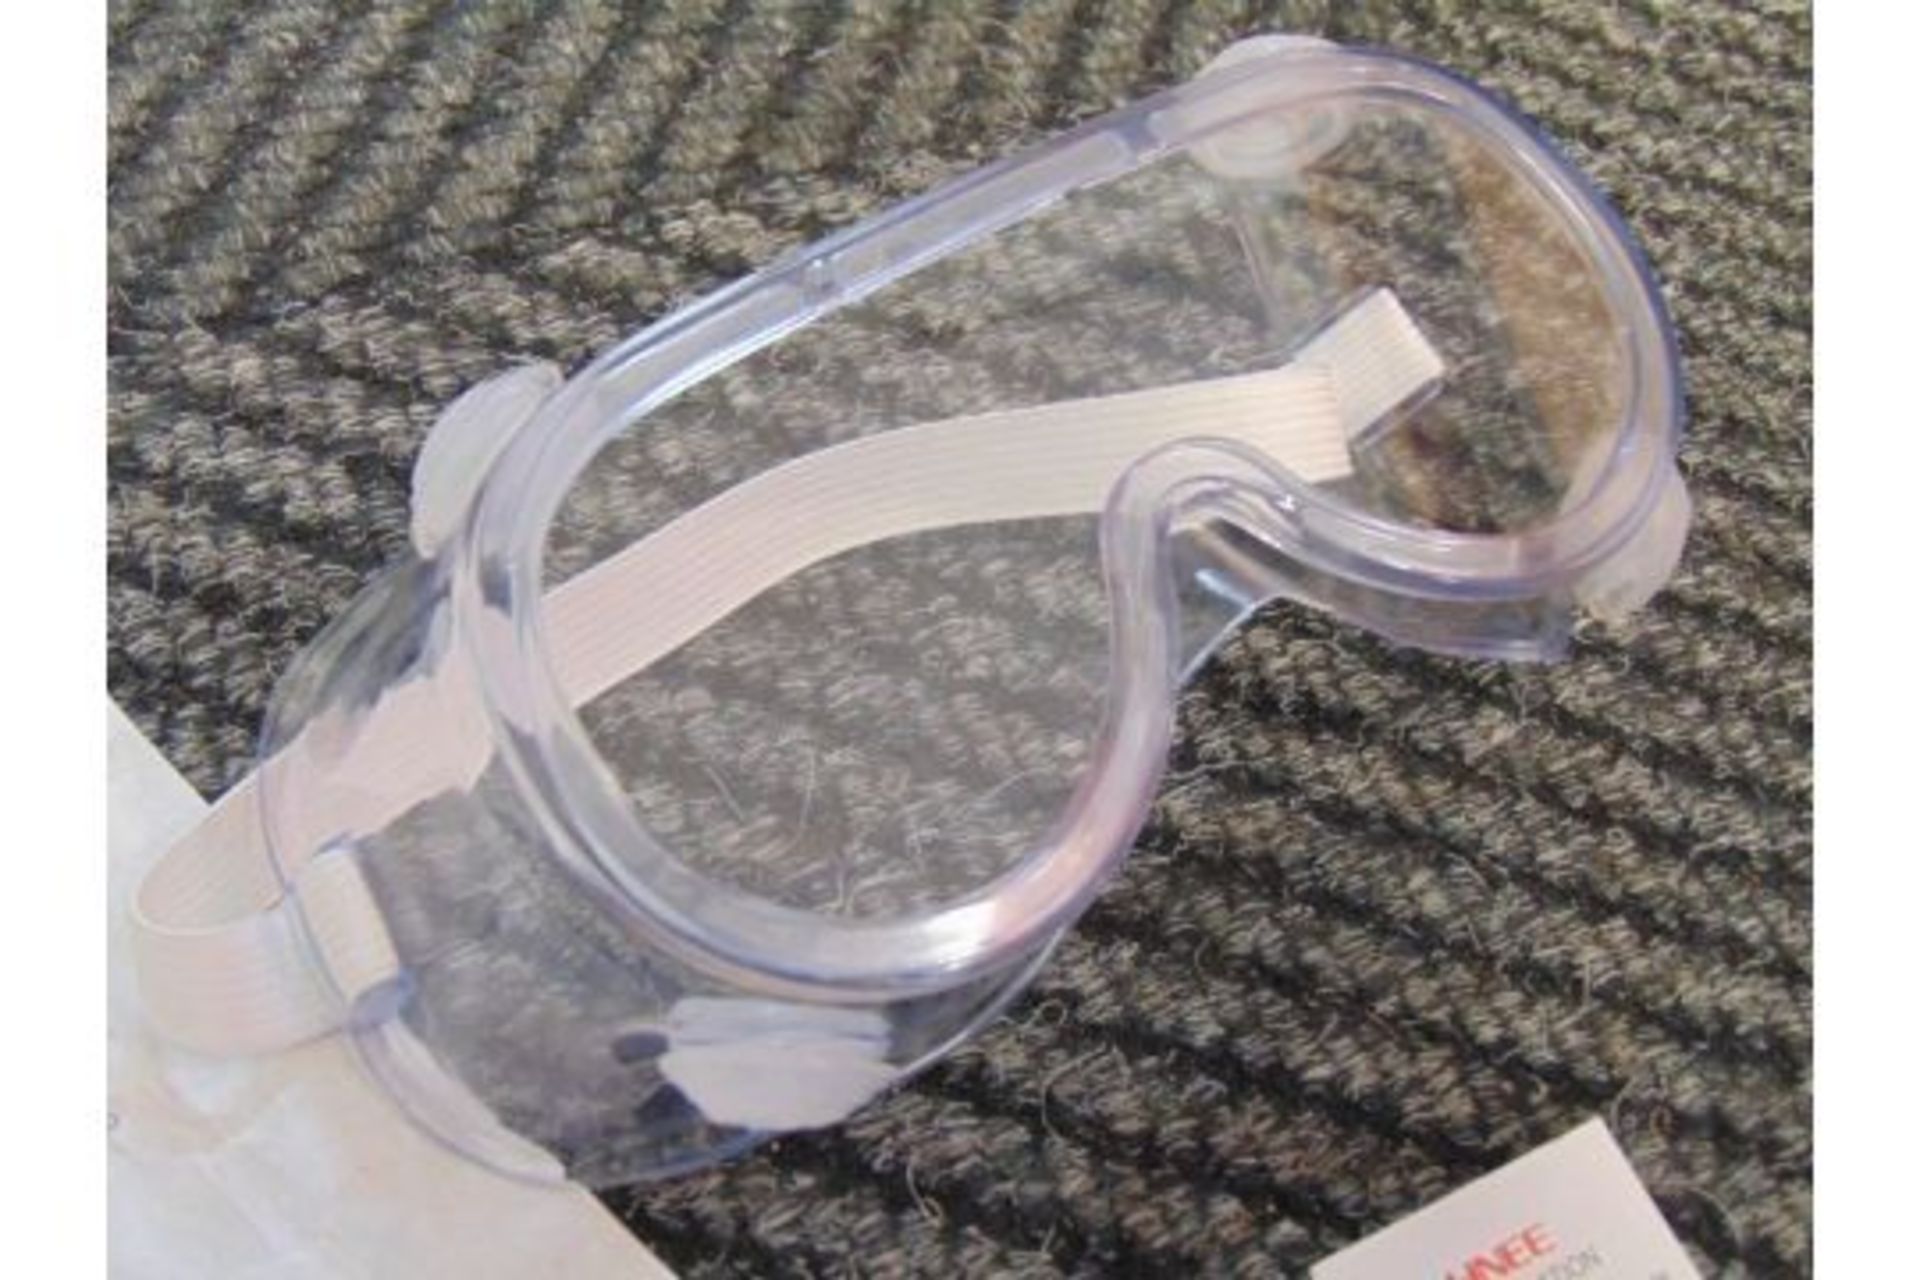 160 x NEW UNISSUED Safety goggles GLYZ1-1 - Image 7 of 15